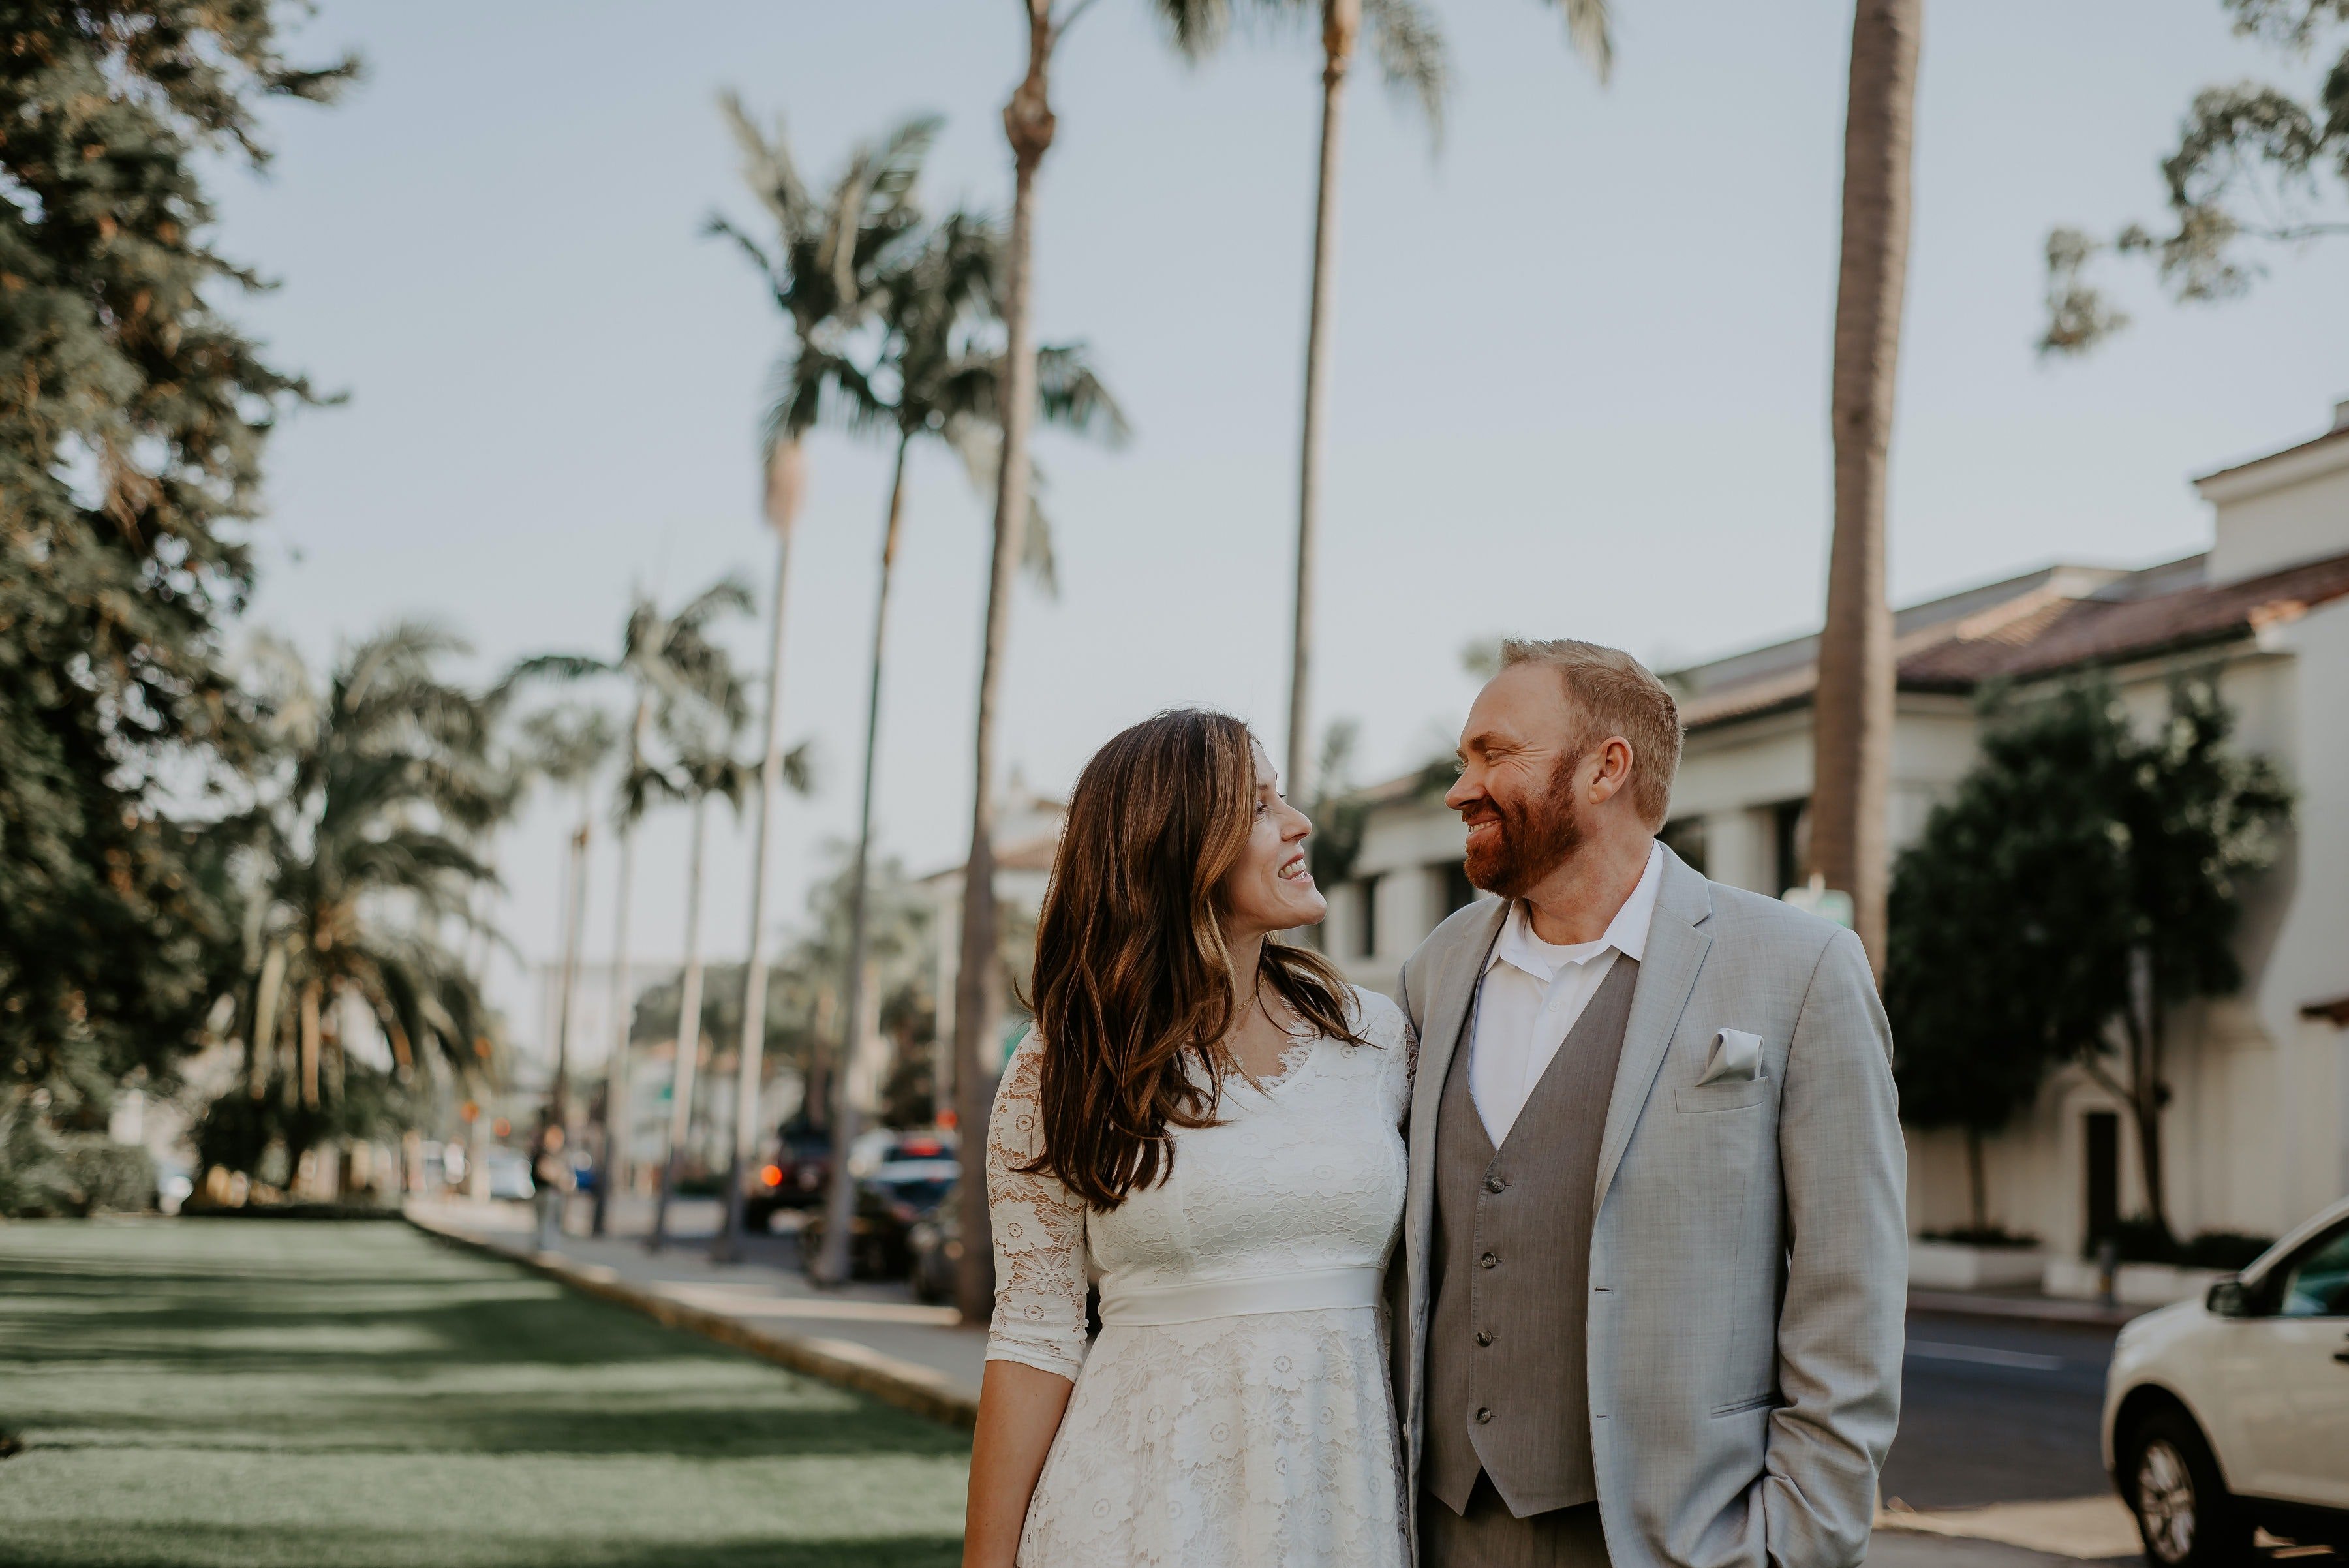 Happily married couple. | Source: Pexels/Ro Be 